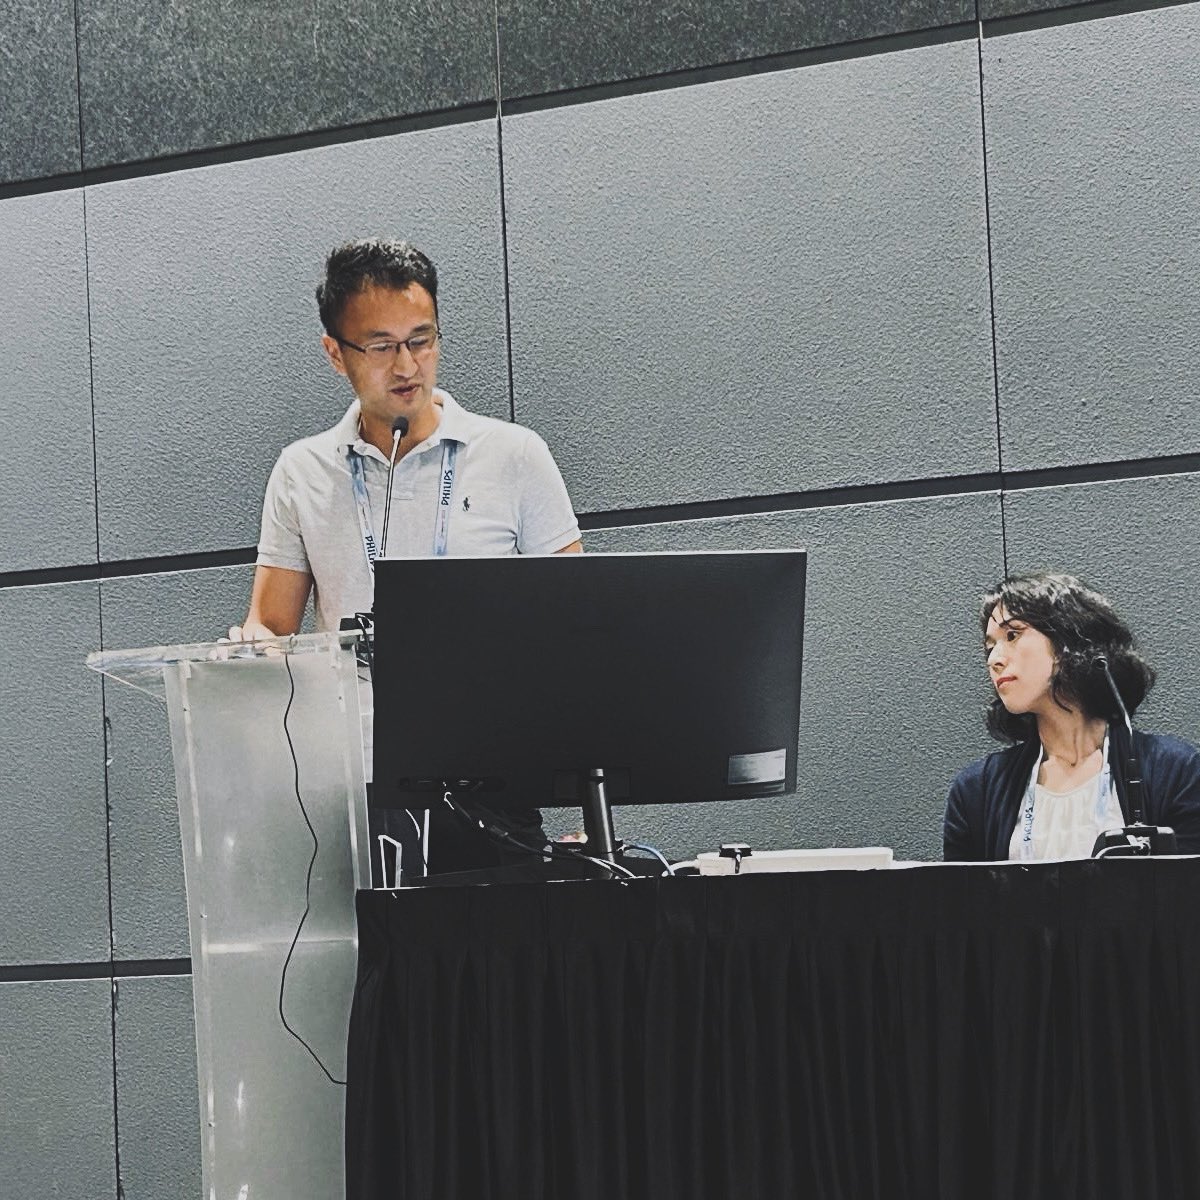 A nerve-racking but also exhilarating experience presenting our preliminary work on BBB ASL at #ISMRM this year. Thank you @HMutsaerts for snapping this memorable photo.